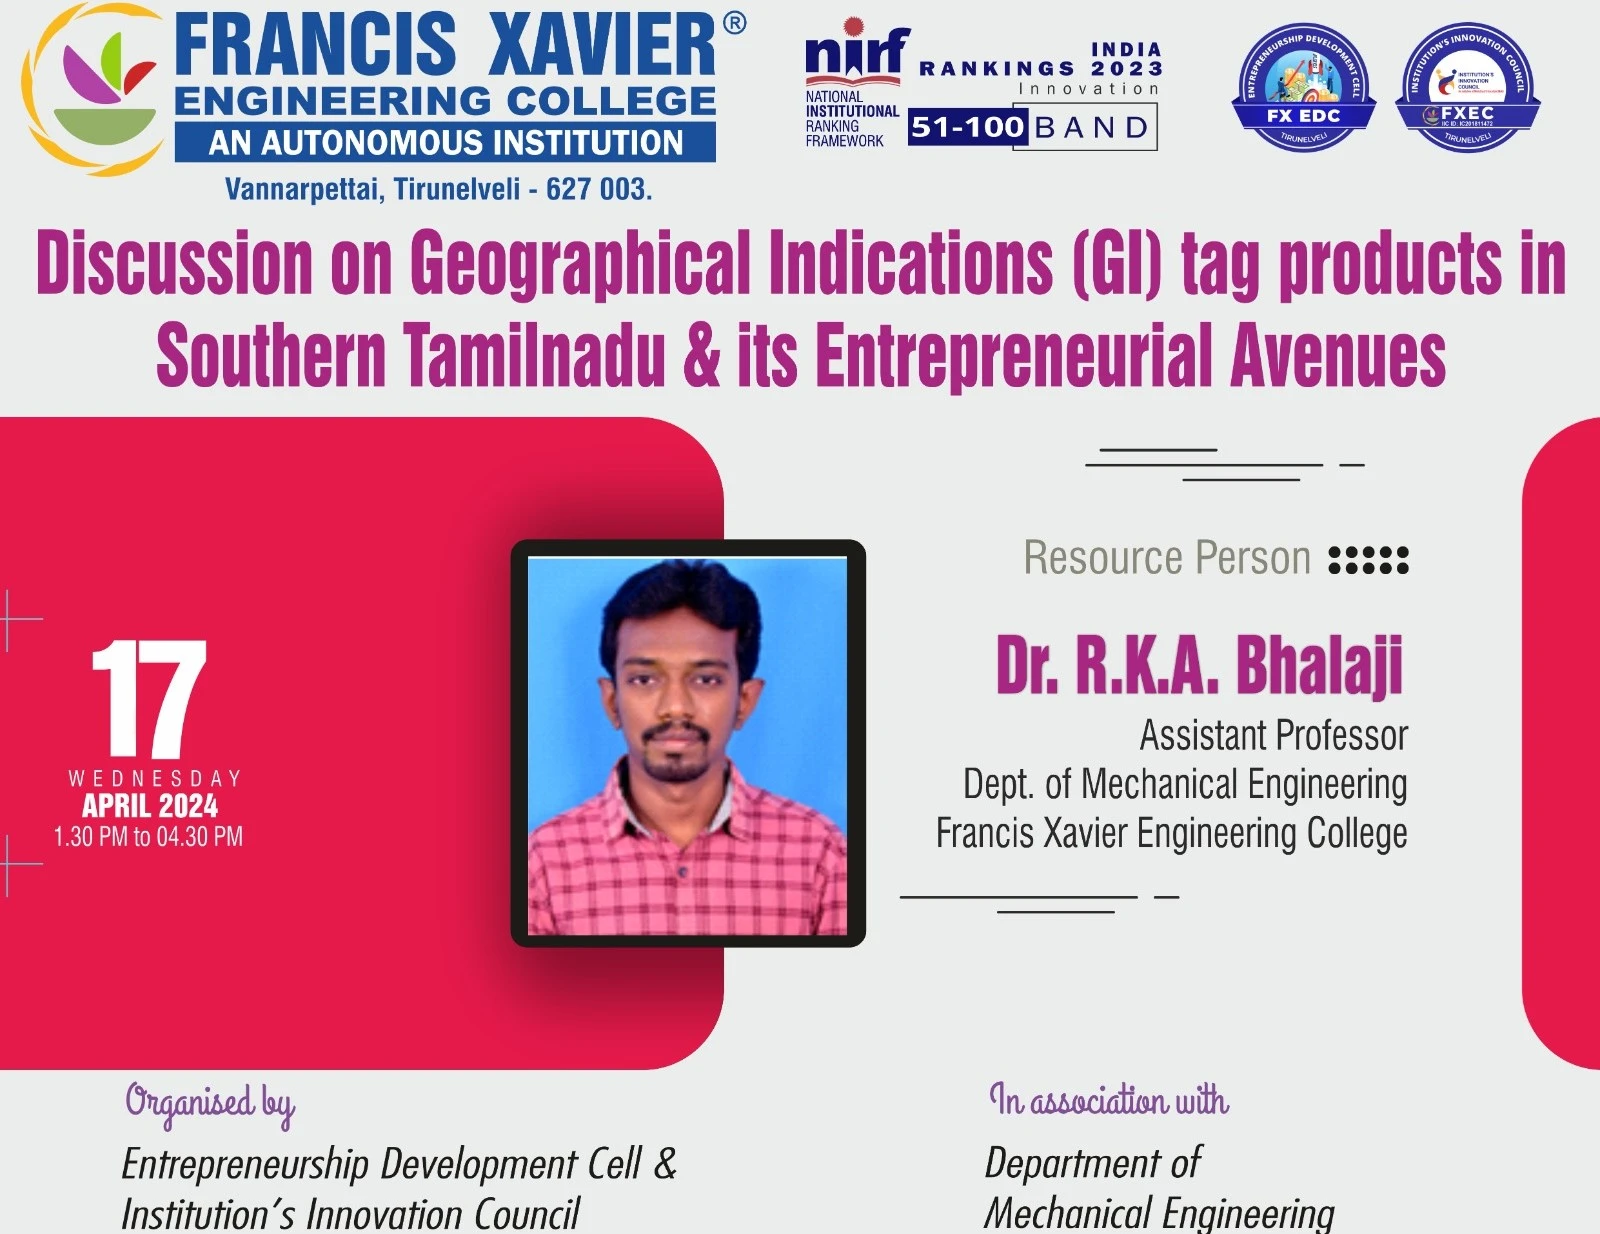    Discussion on Geographical Indications (GI) tag products in southern Tamilnadu and its Entrepreneurial Avenues